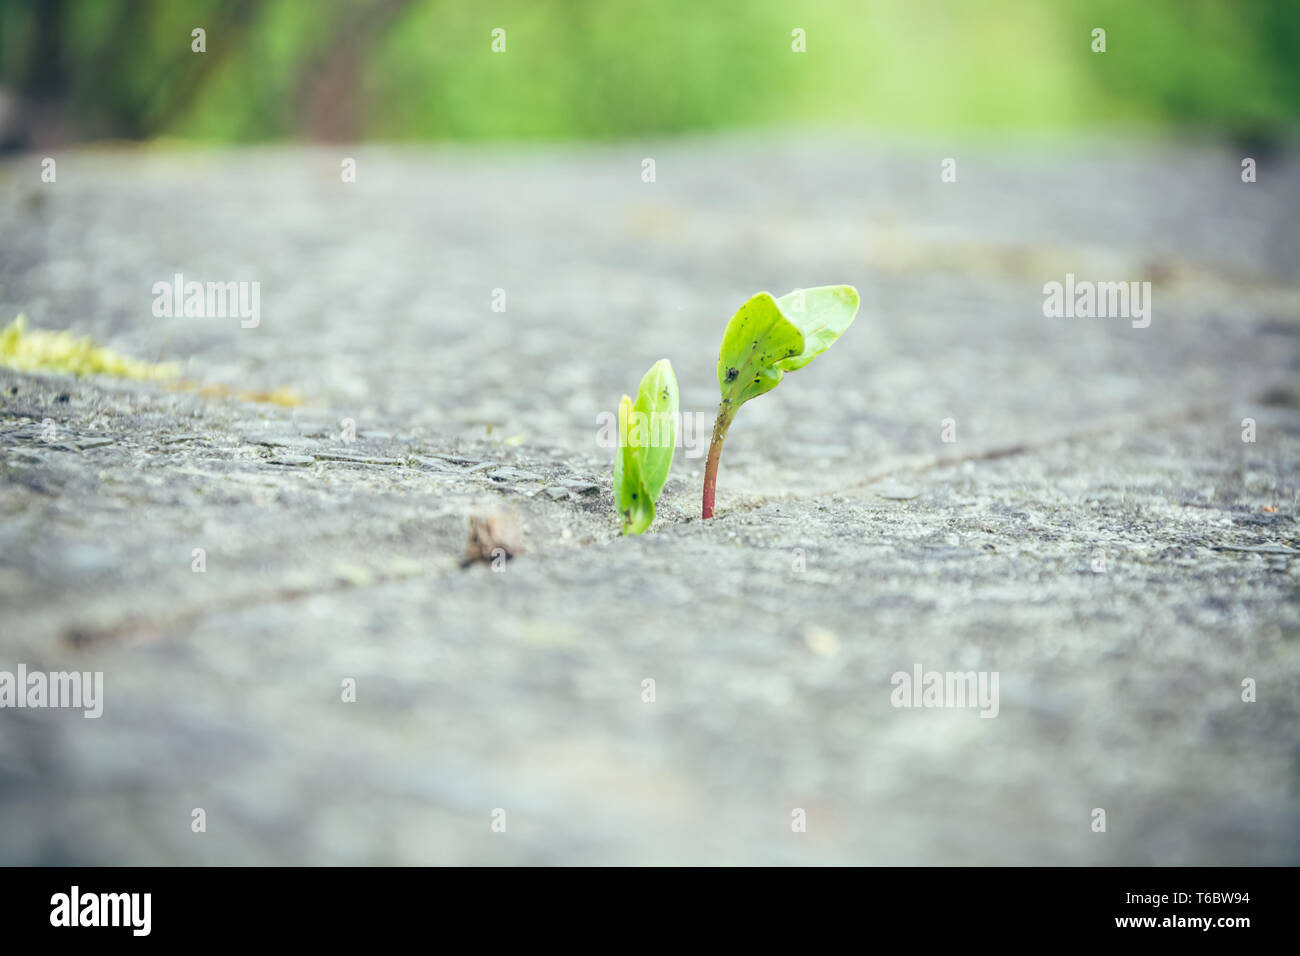 Spring plant growing up between paving stones Stock Photo